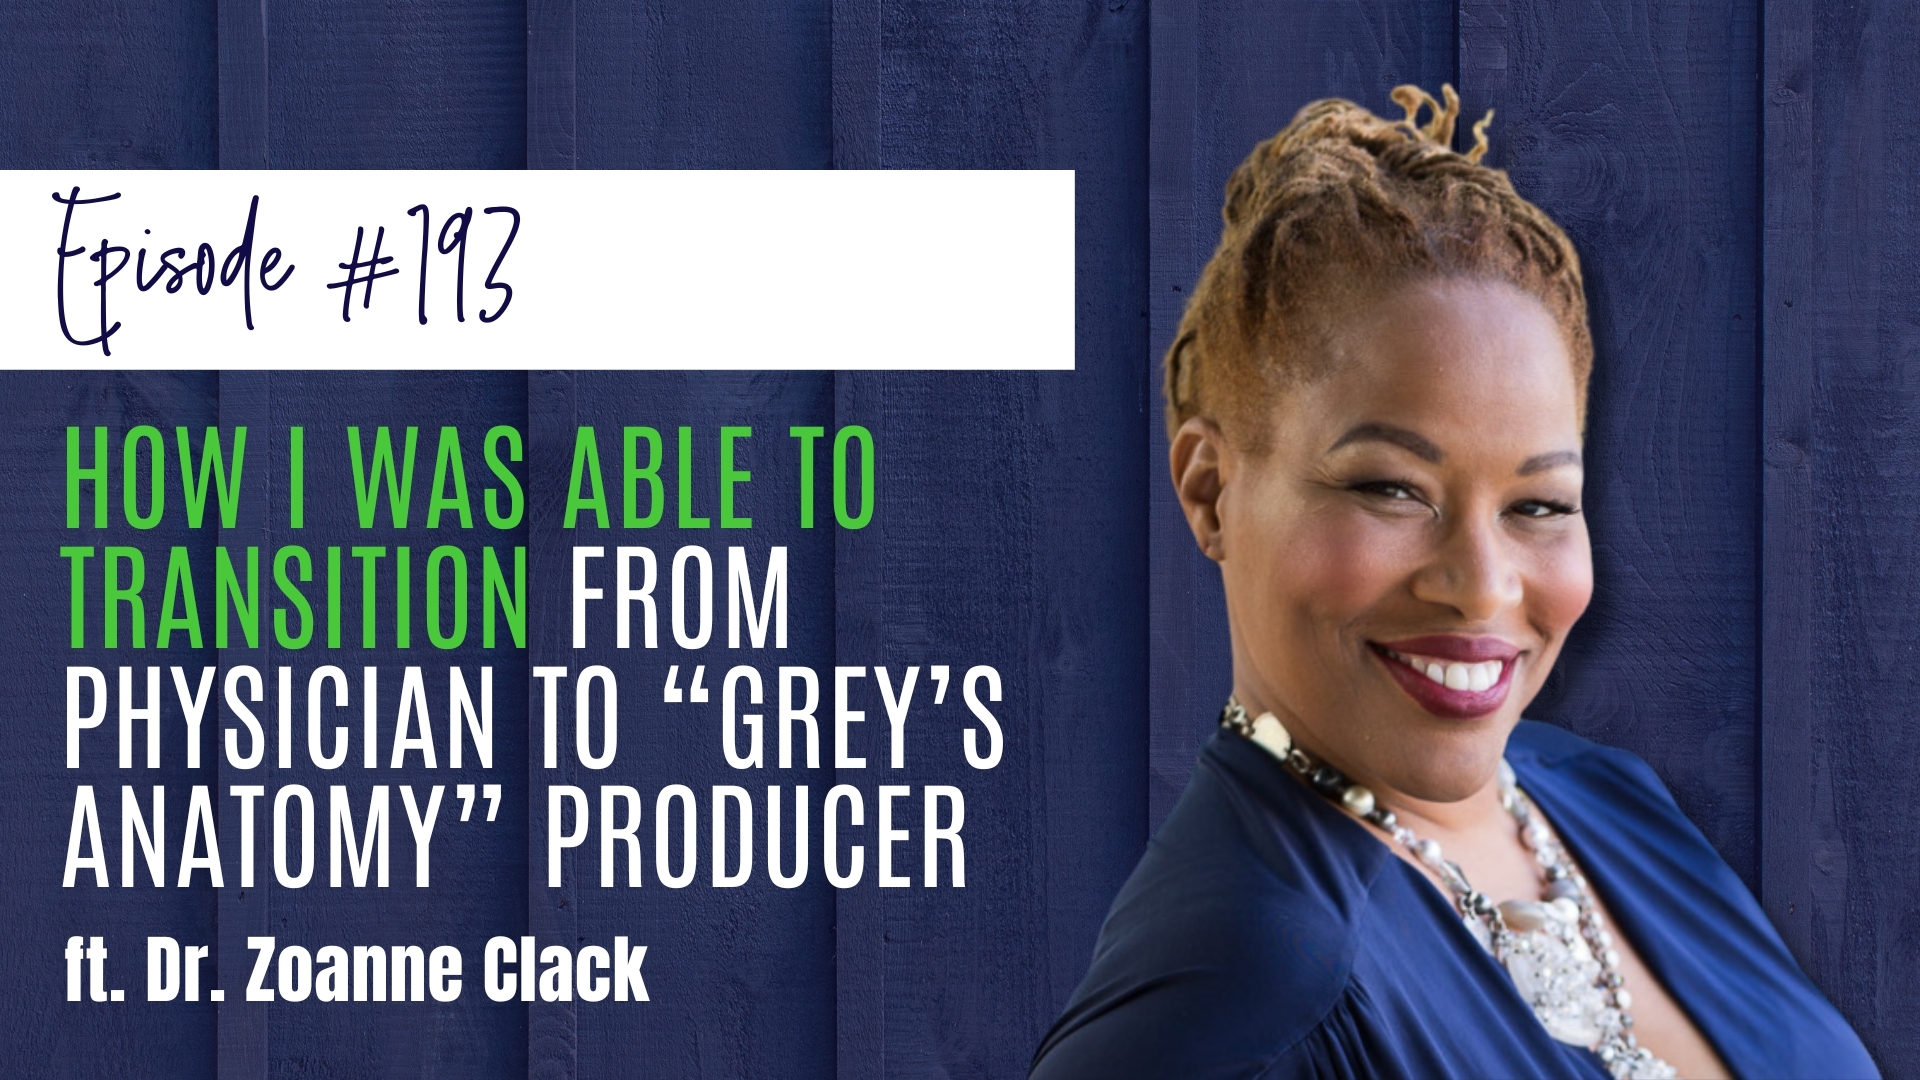 #193 How I Was Able to Transition From Physician to “Grey’s Anatomy” Producer, ft. Dr. Zoanne Clack